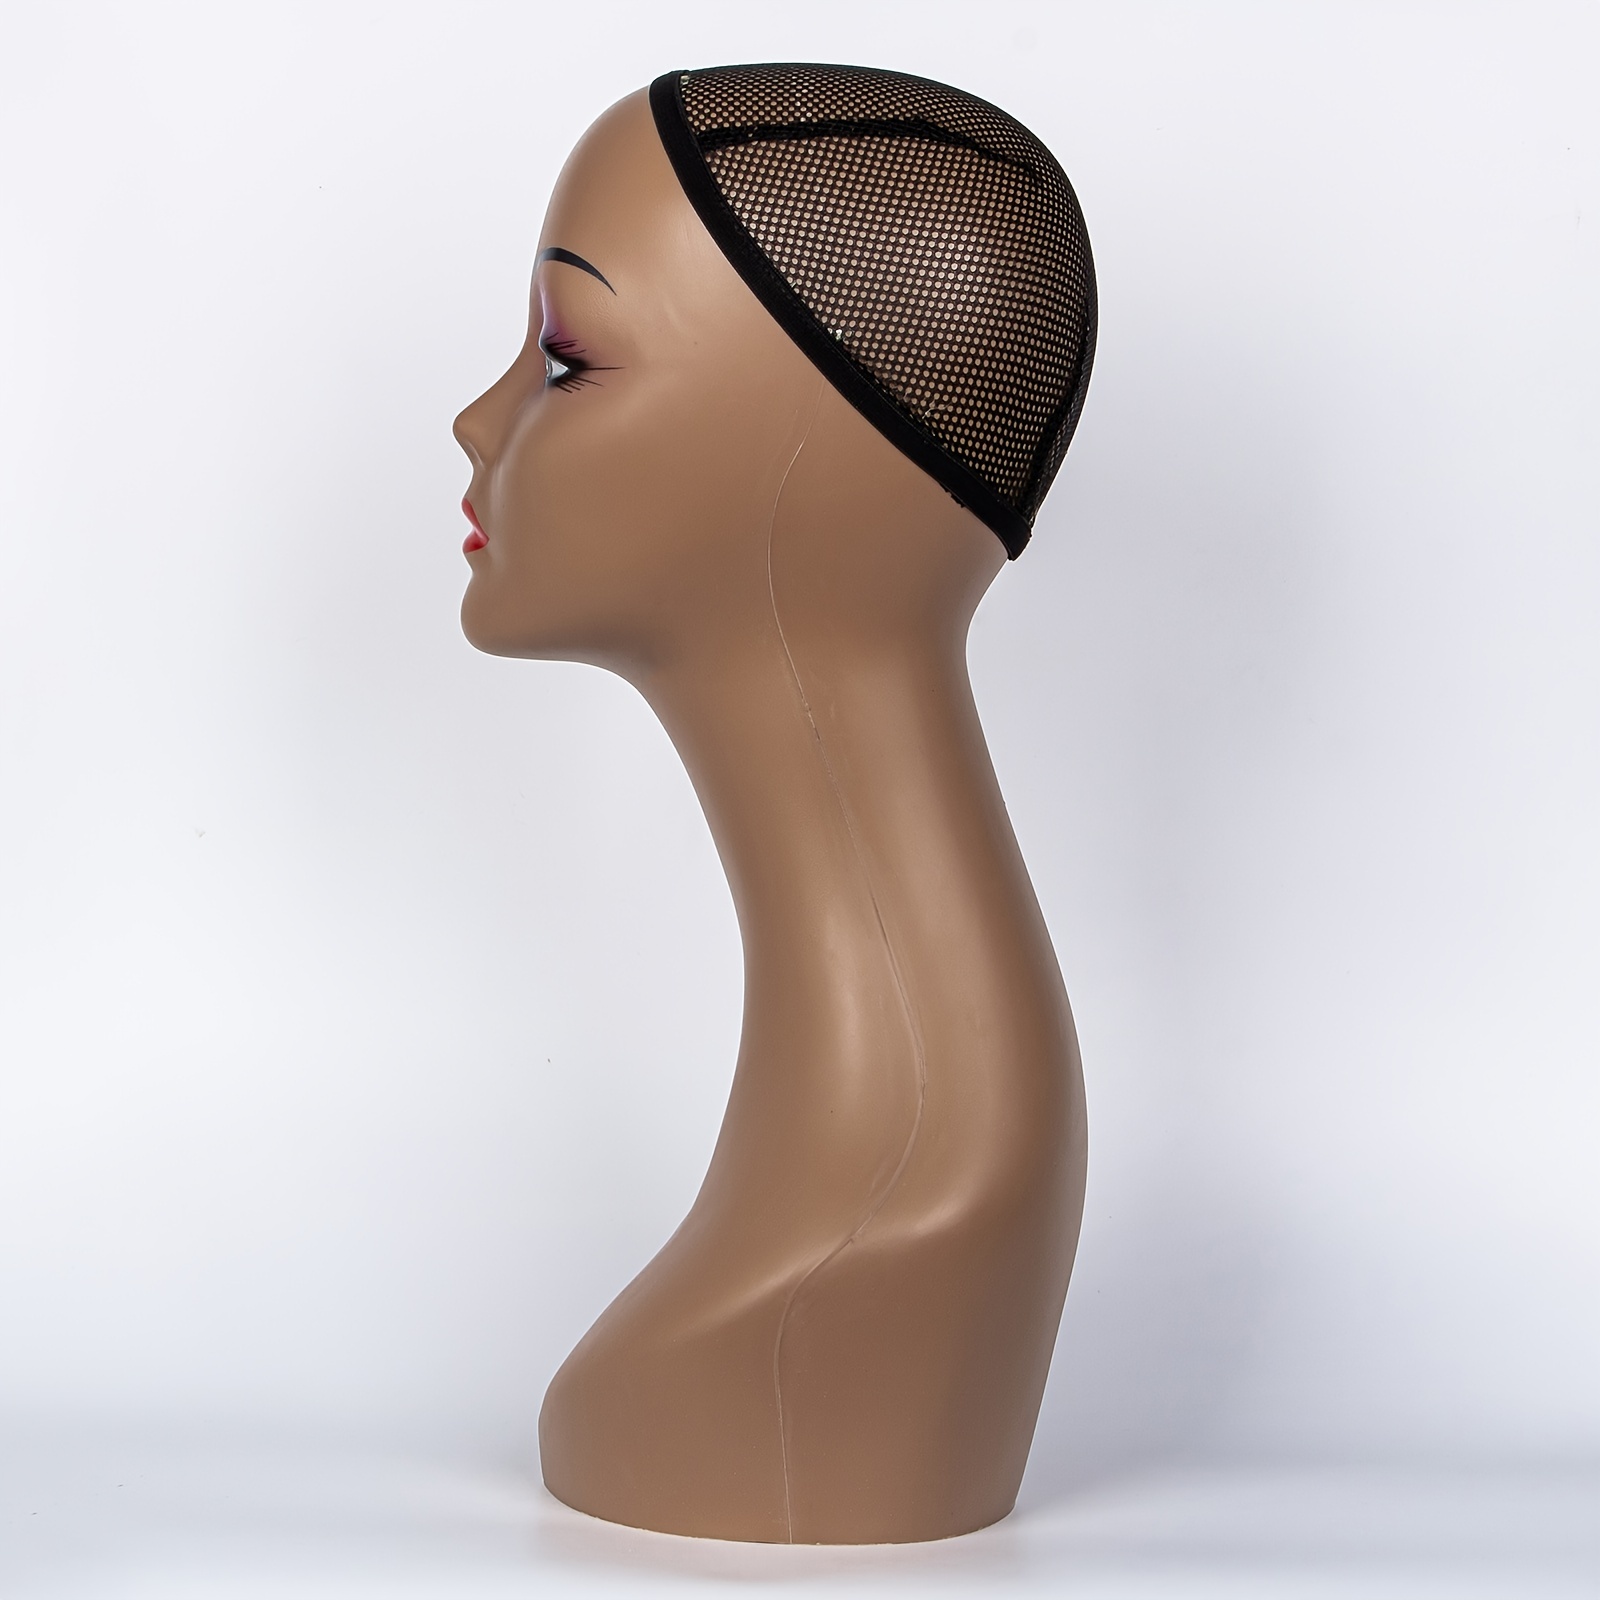 Manequin Head For Wigs Hats Sunglasses Jewelry Display Female Begin Dark  Brown Maniquin Head Stand For Wigs Makeup Manikin Head